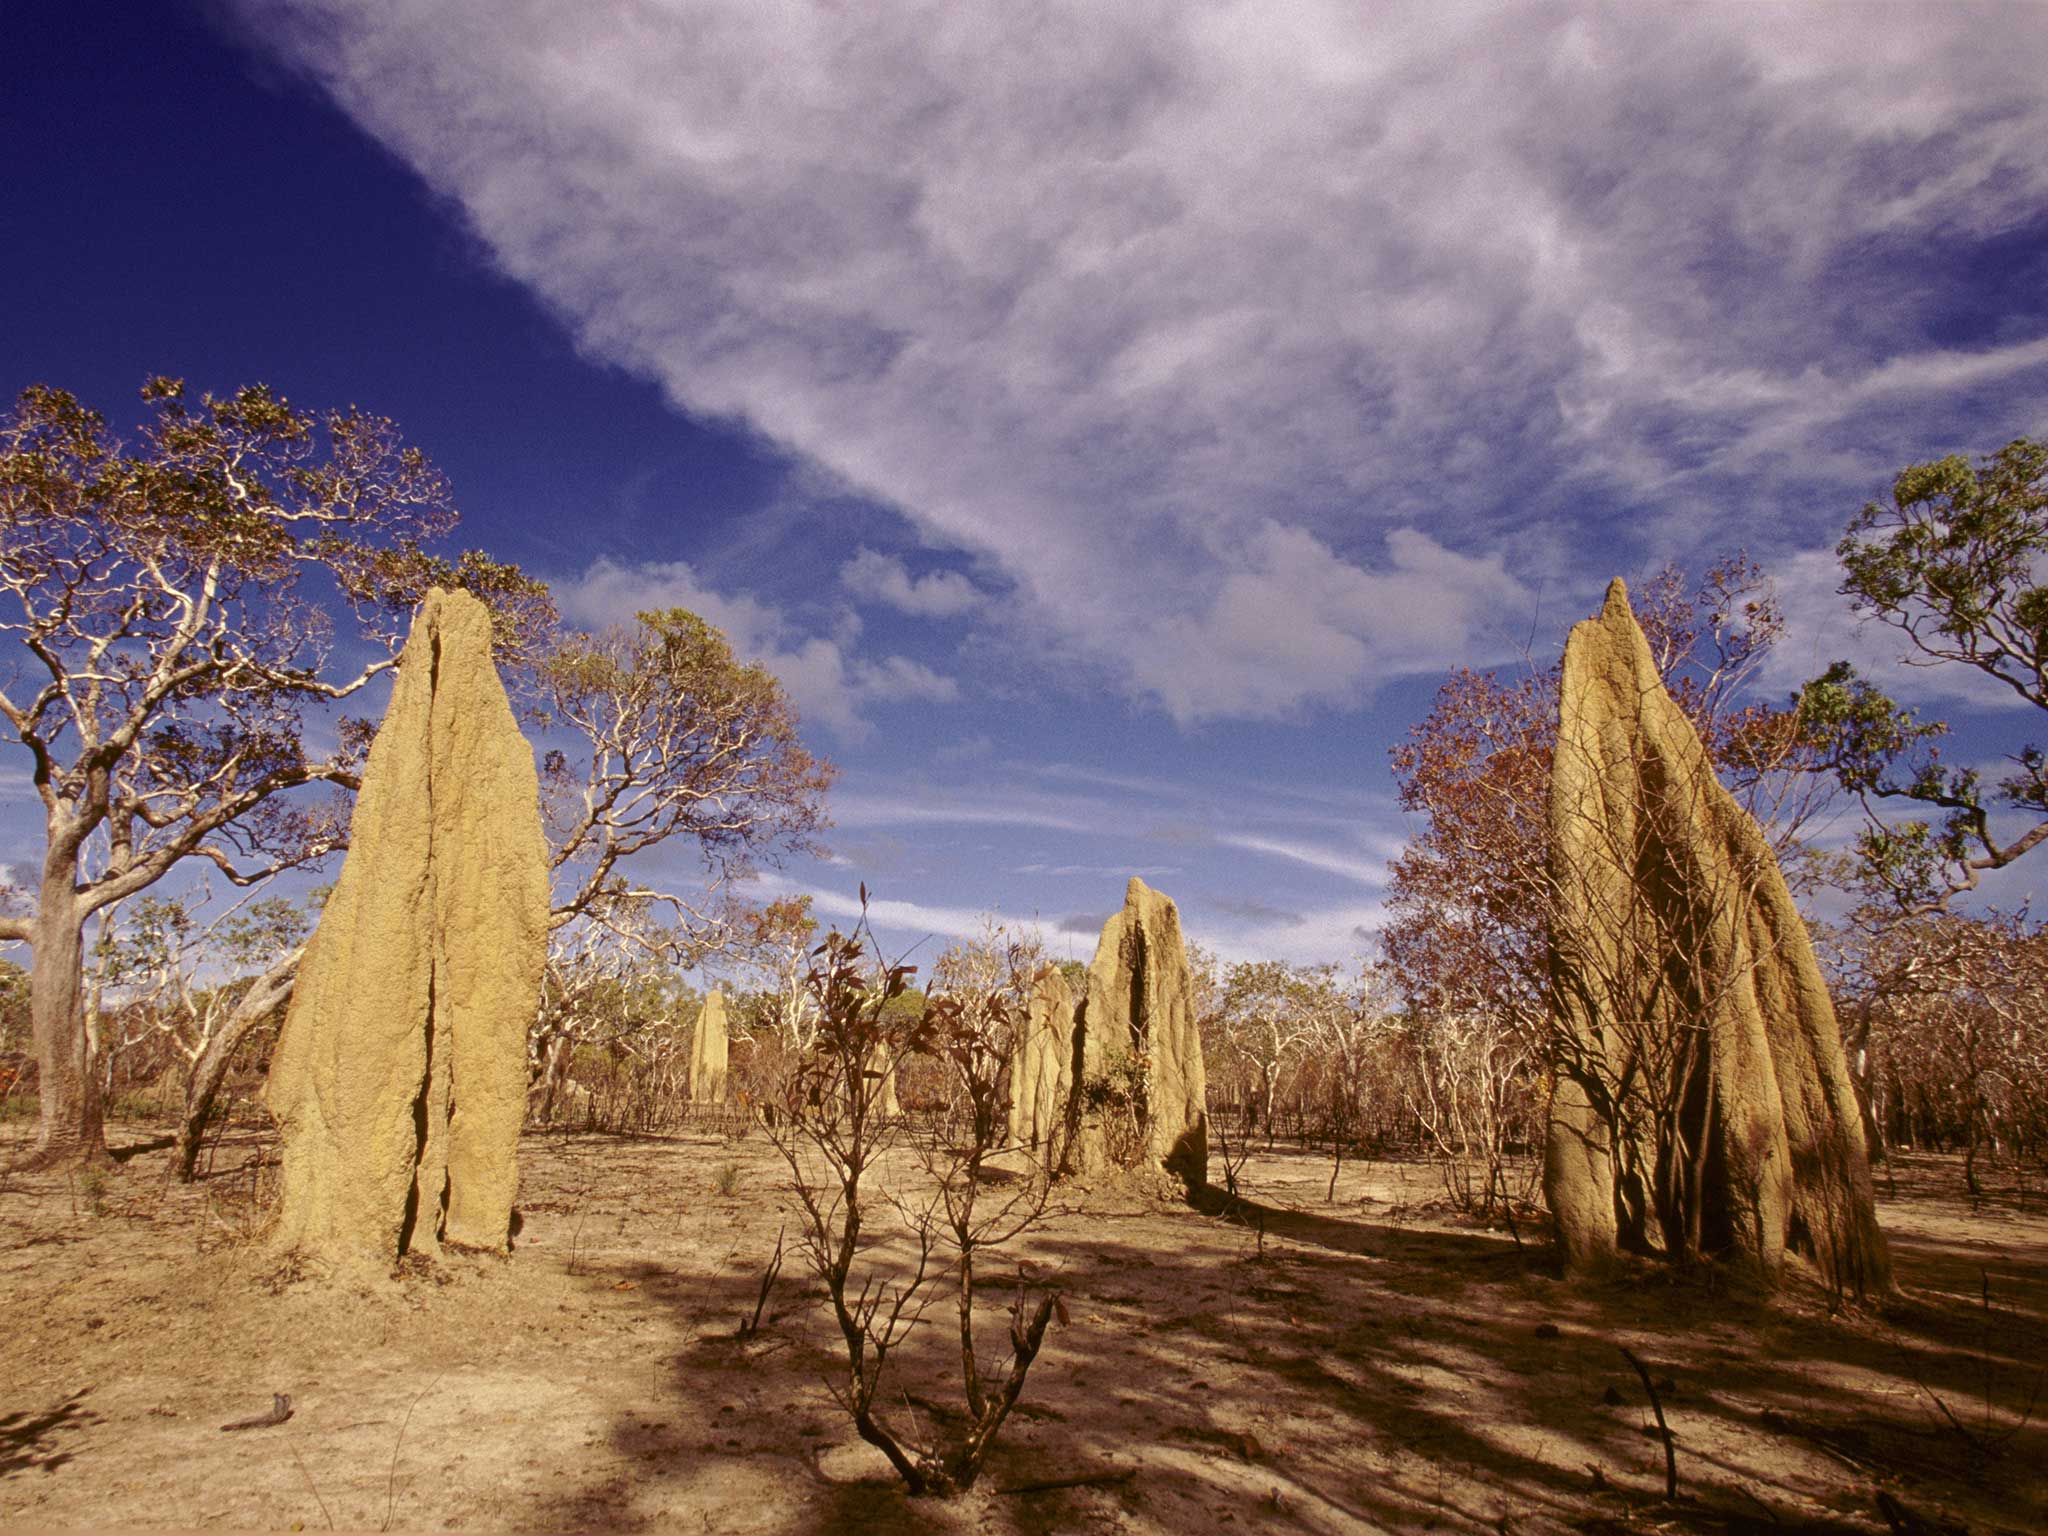 Termite nests in Queensland, Australia. They allow rainwater to penetrate the soil in dry grasslands